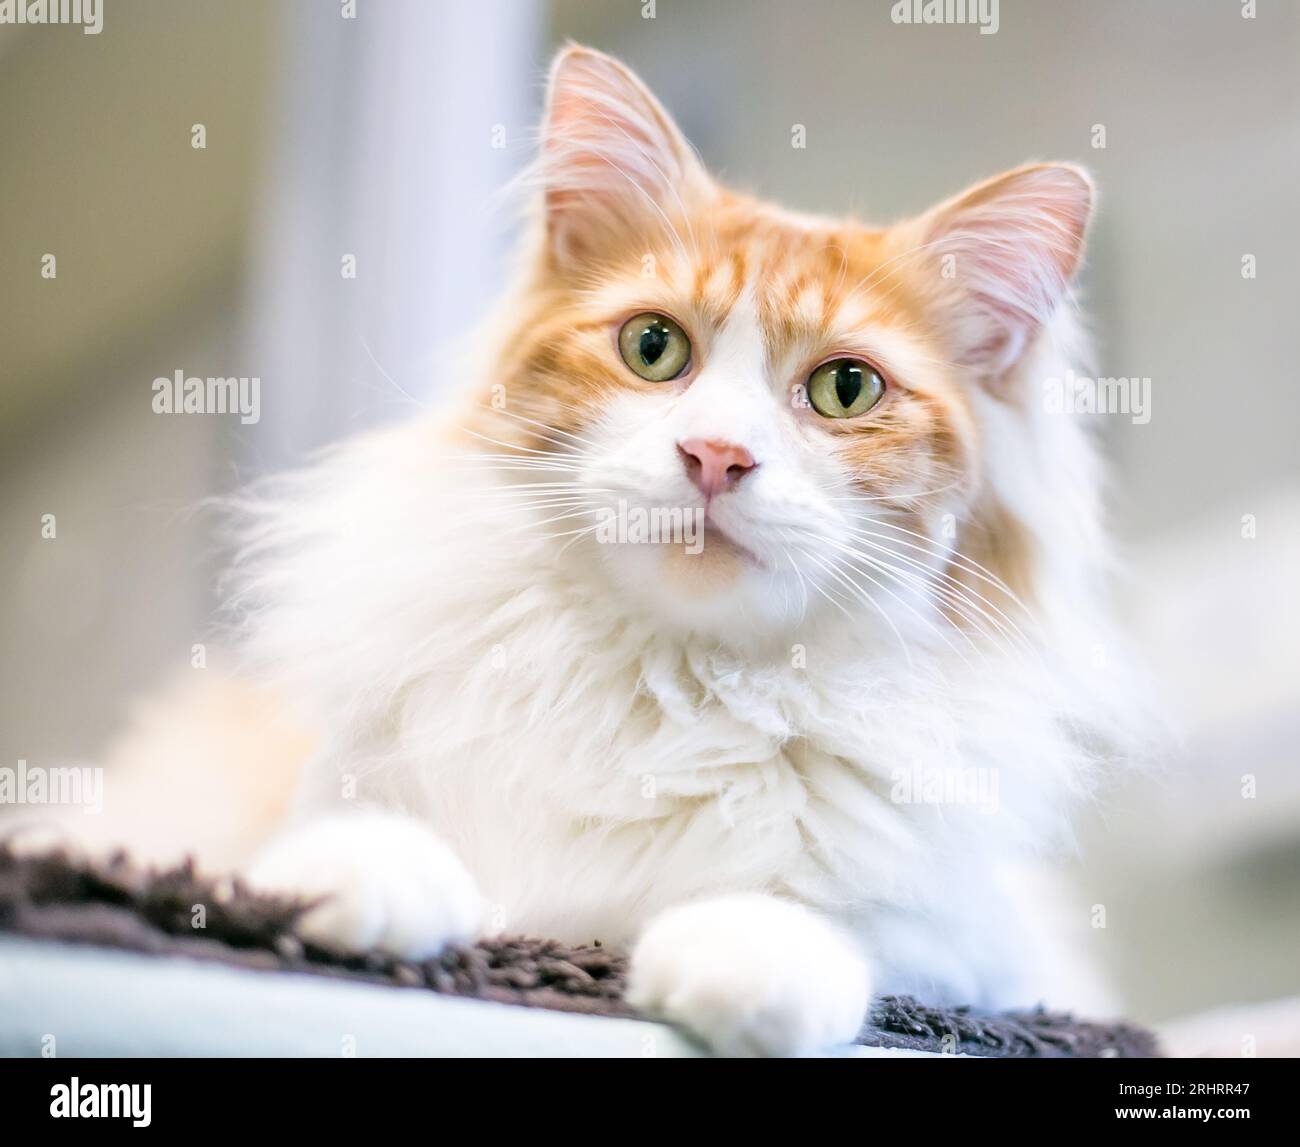 A fluffy domestic medium hair cat with white and orange tabby markings Stock Photo